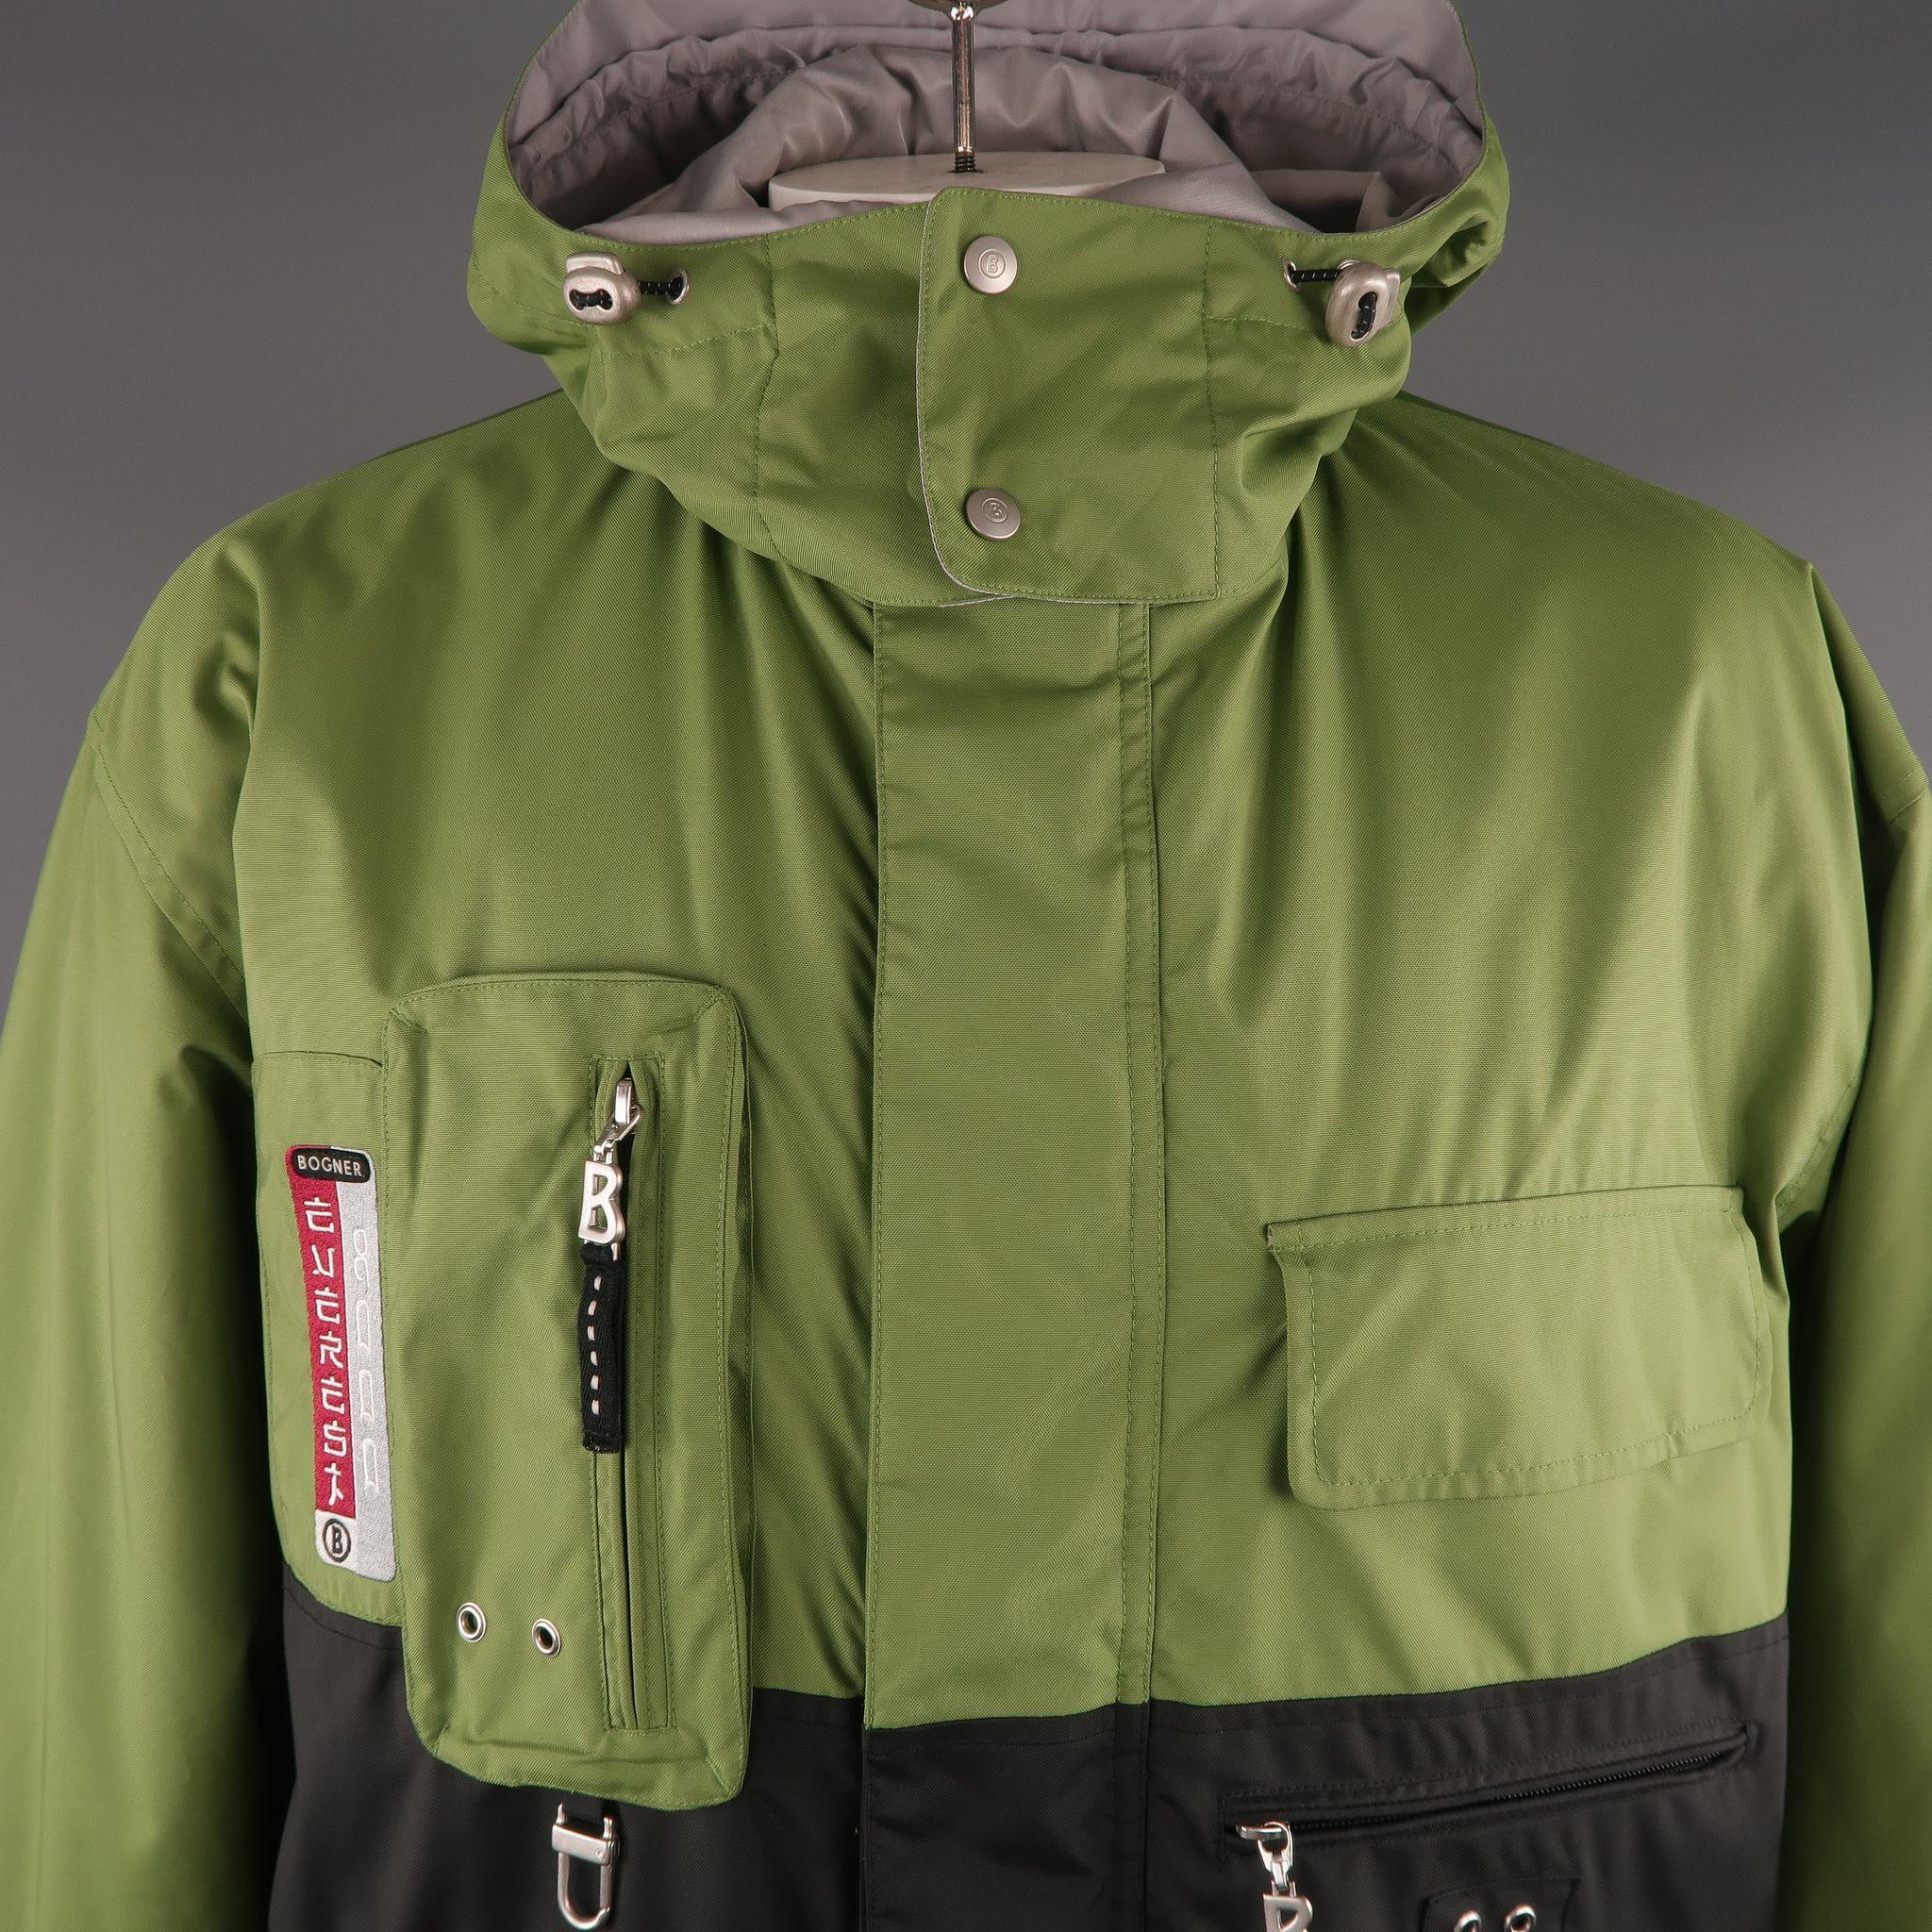 BOGNER Ski Jacket comes in green, black and grey tones in a polyamide material, with zip and cargo  pockets, snaps, drawstring, hood and zip up.
 
Excellent Pre-Owned Condition.
Marked: 40
 
Measurements:
 
Shoulder: 24 in.
Chest: 51 in.
Sleeve: